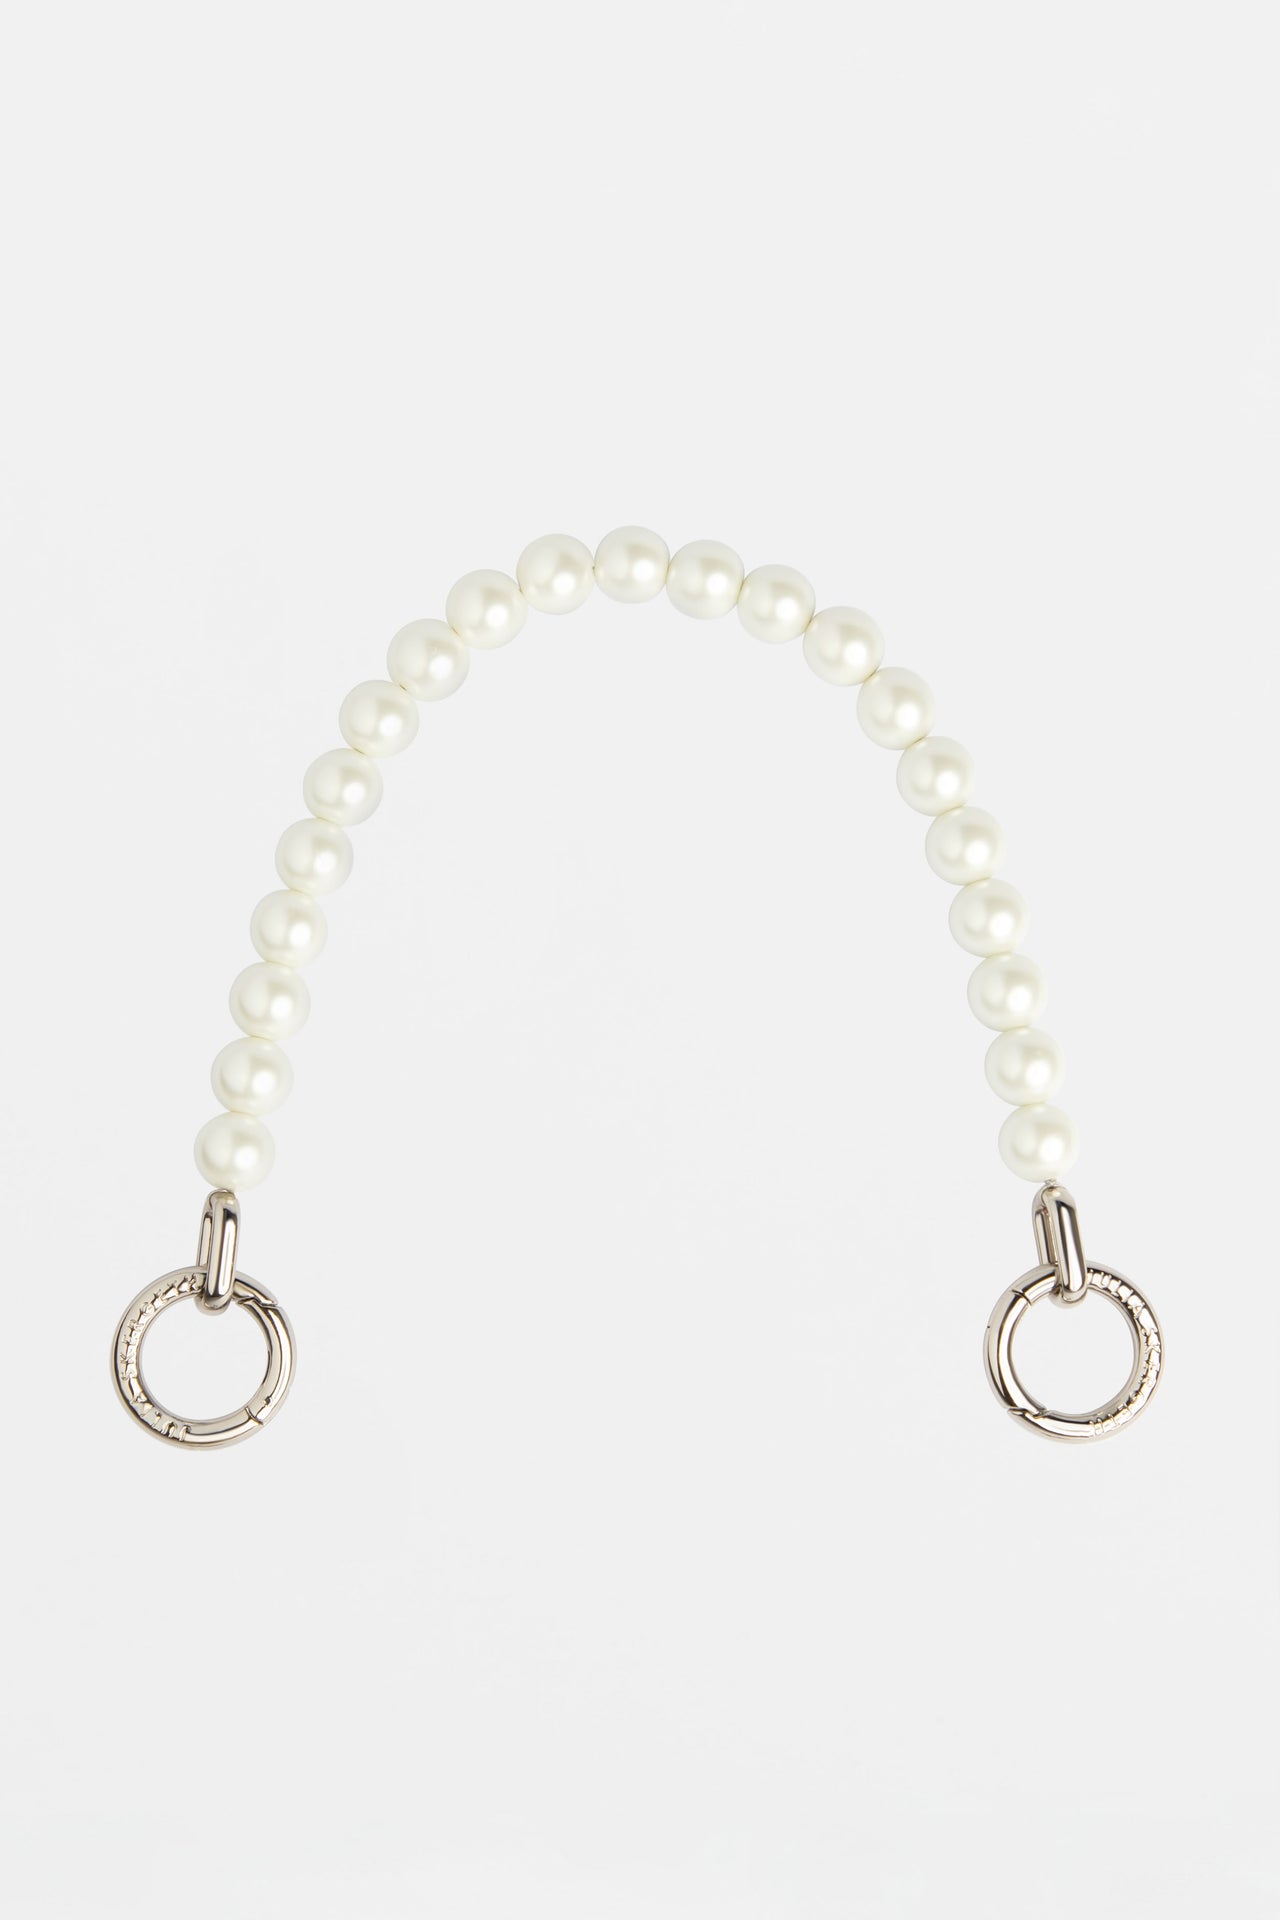 The PEARL CHAIN LONG